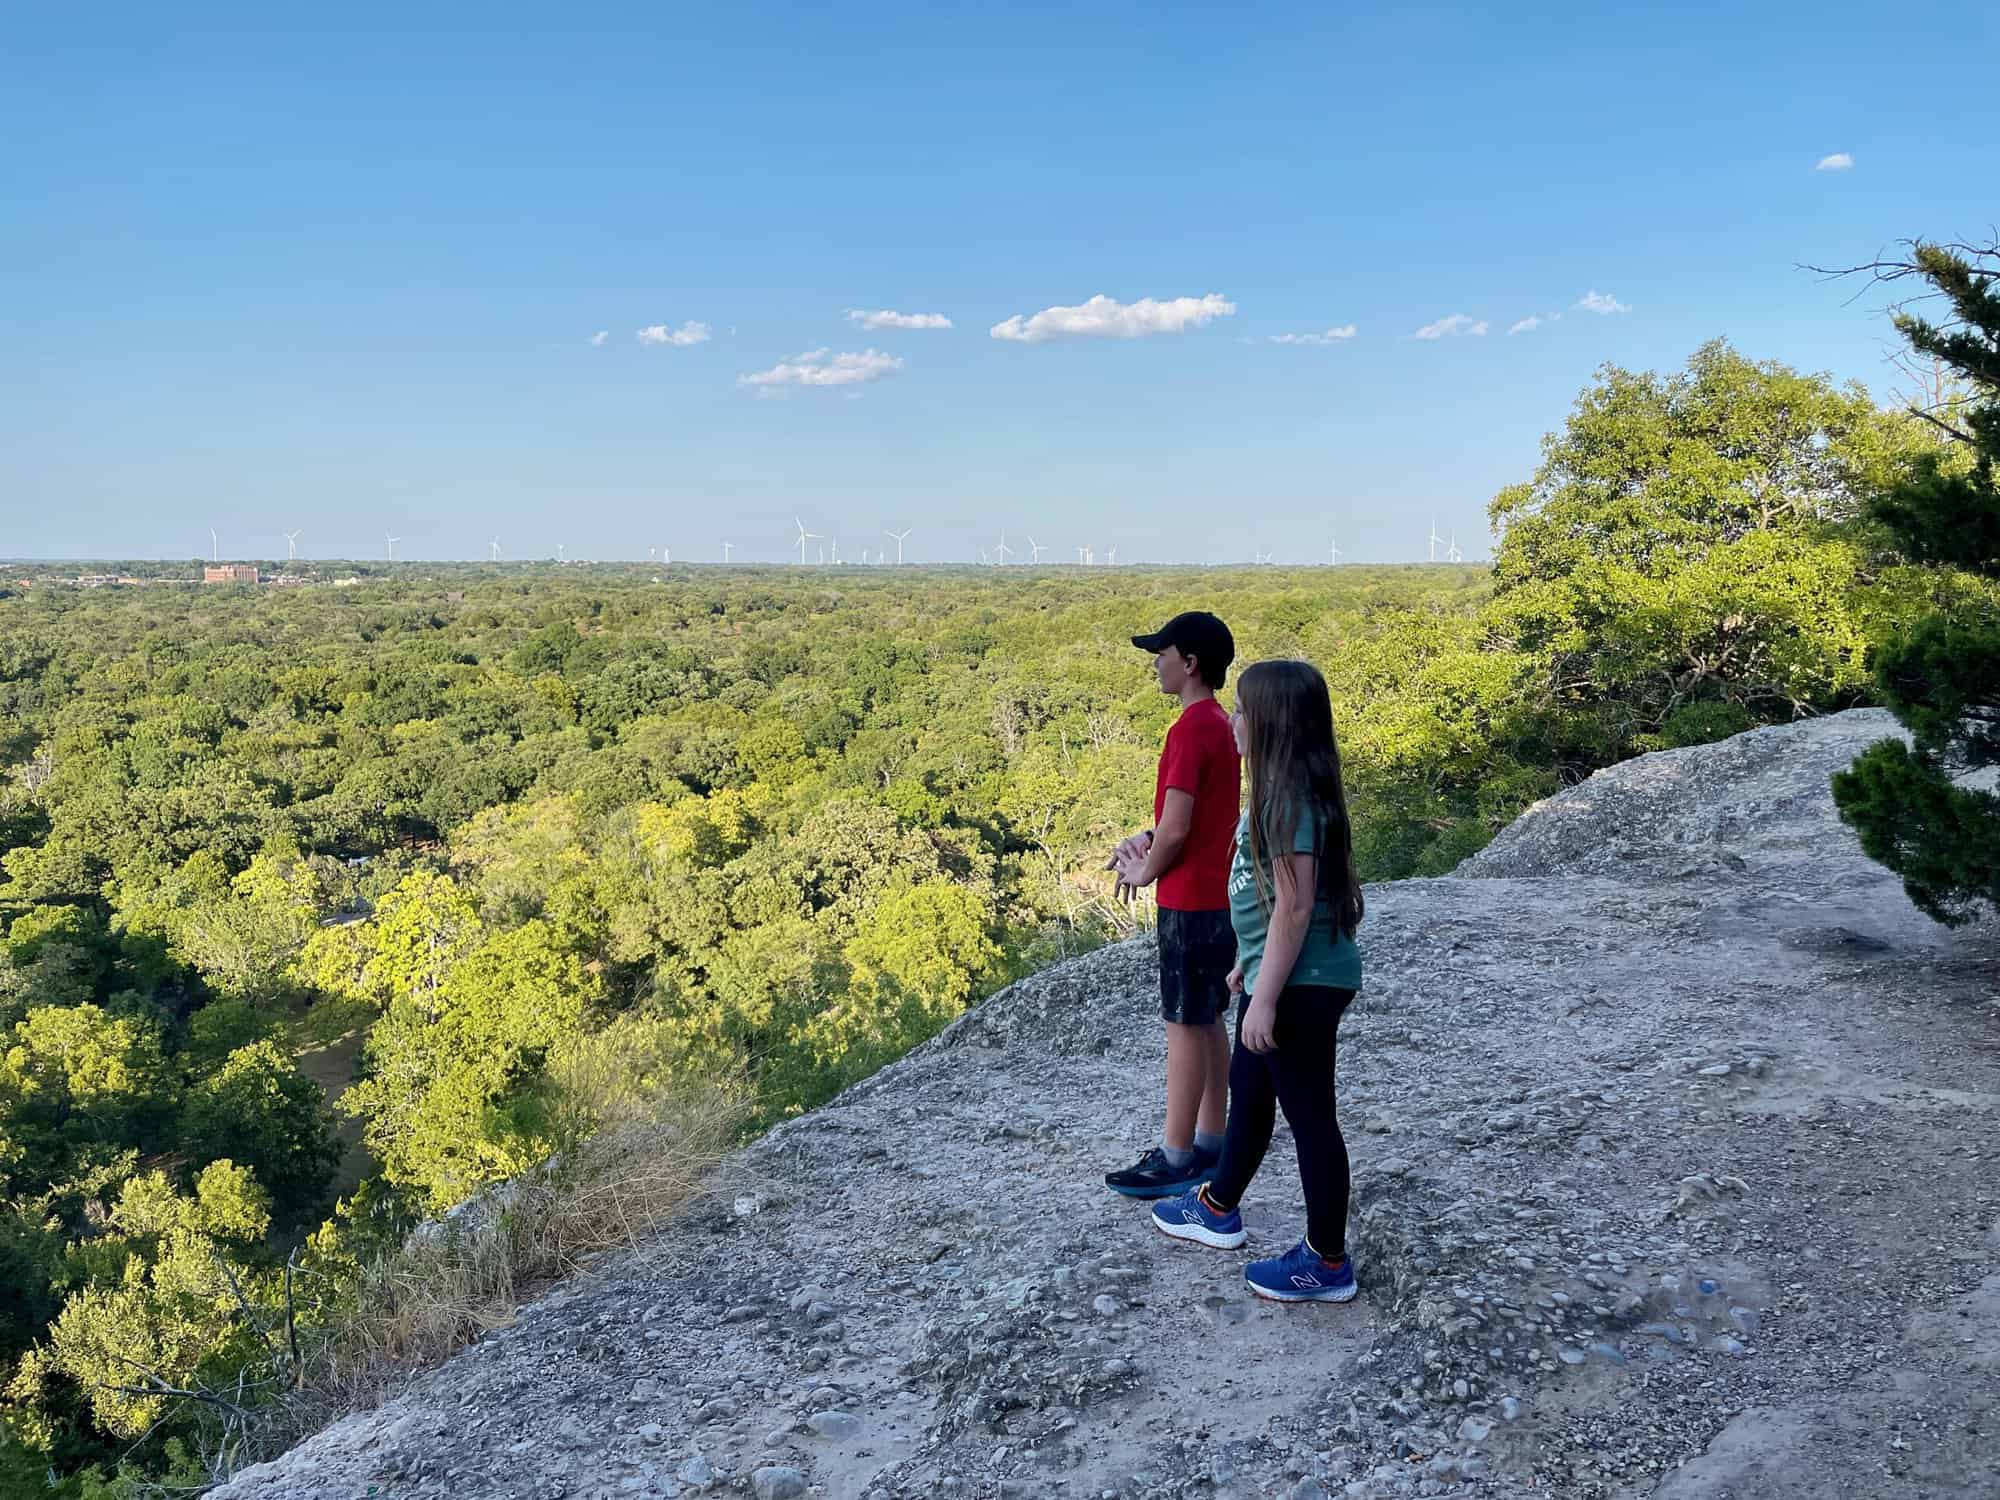 Bromide hill overlook oklahoma chickasaw national recreation area - a national park service site